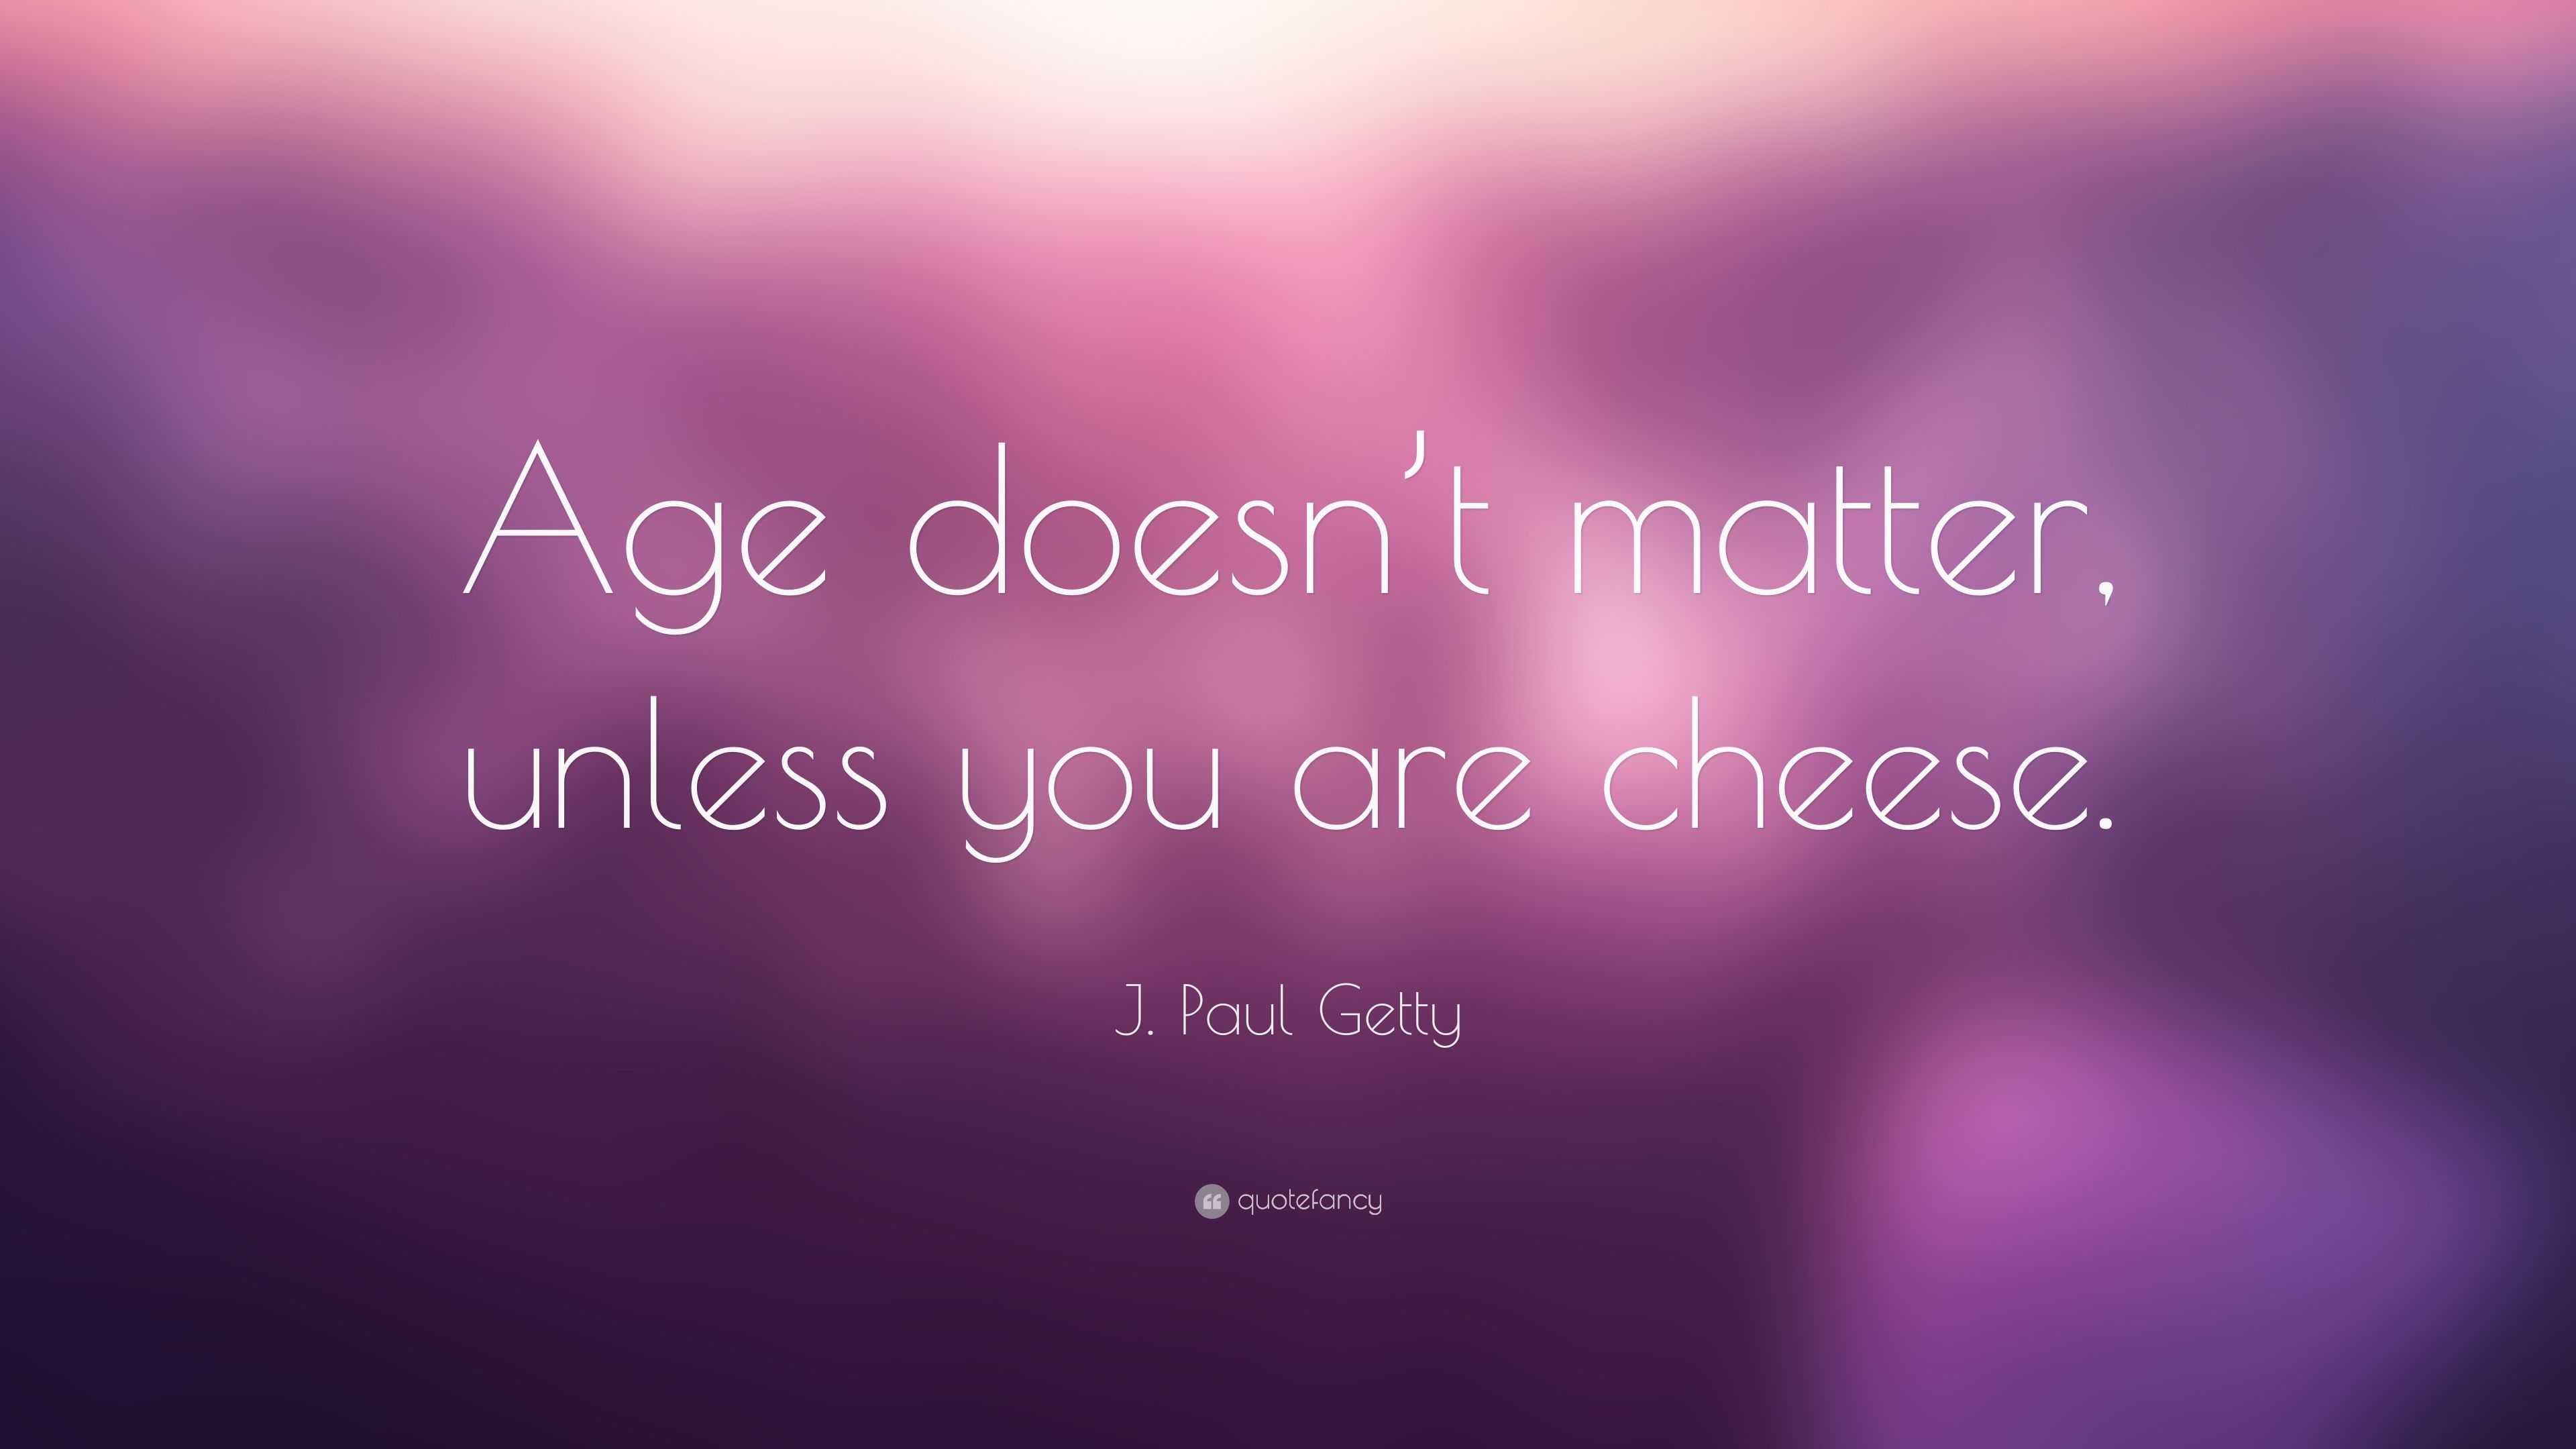 J. Paul Getty Quote: “Age doesn't matter, unless you are cheese.”